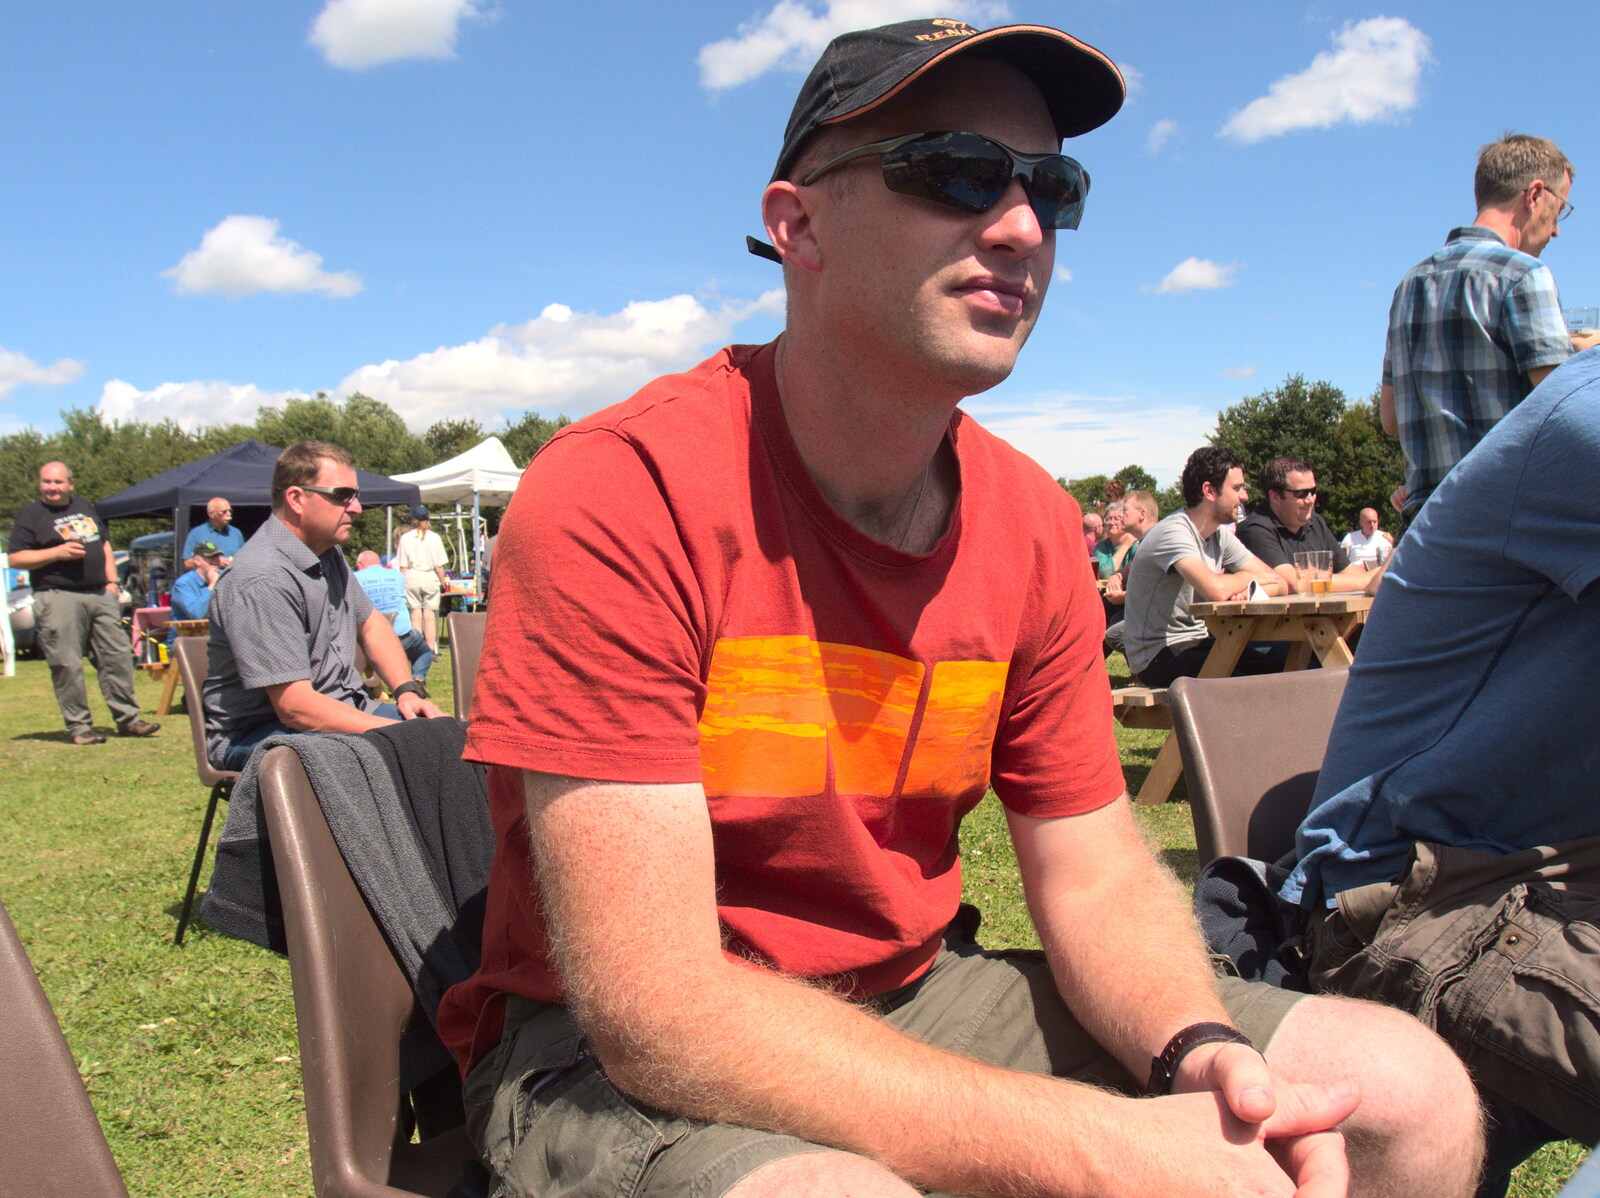 Paul watches stuff from The Humpty Dumpty Beer Festival, Reedham, Norfolk - 22nd July 2017